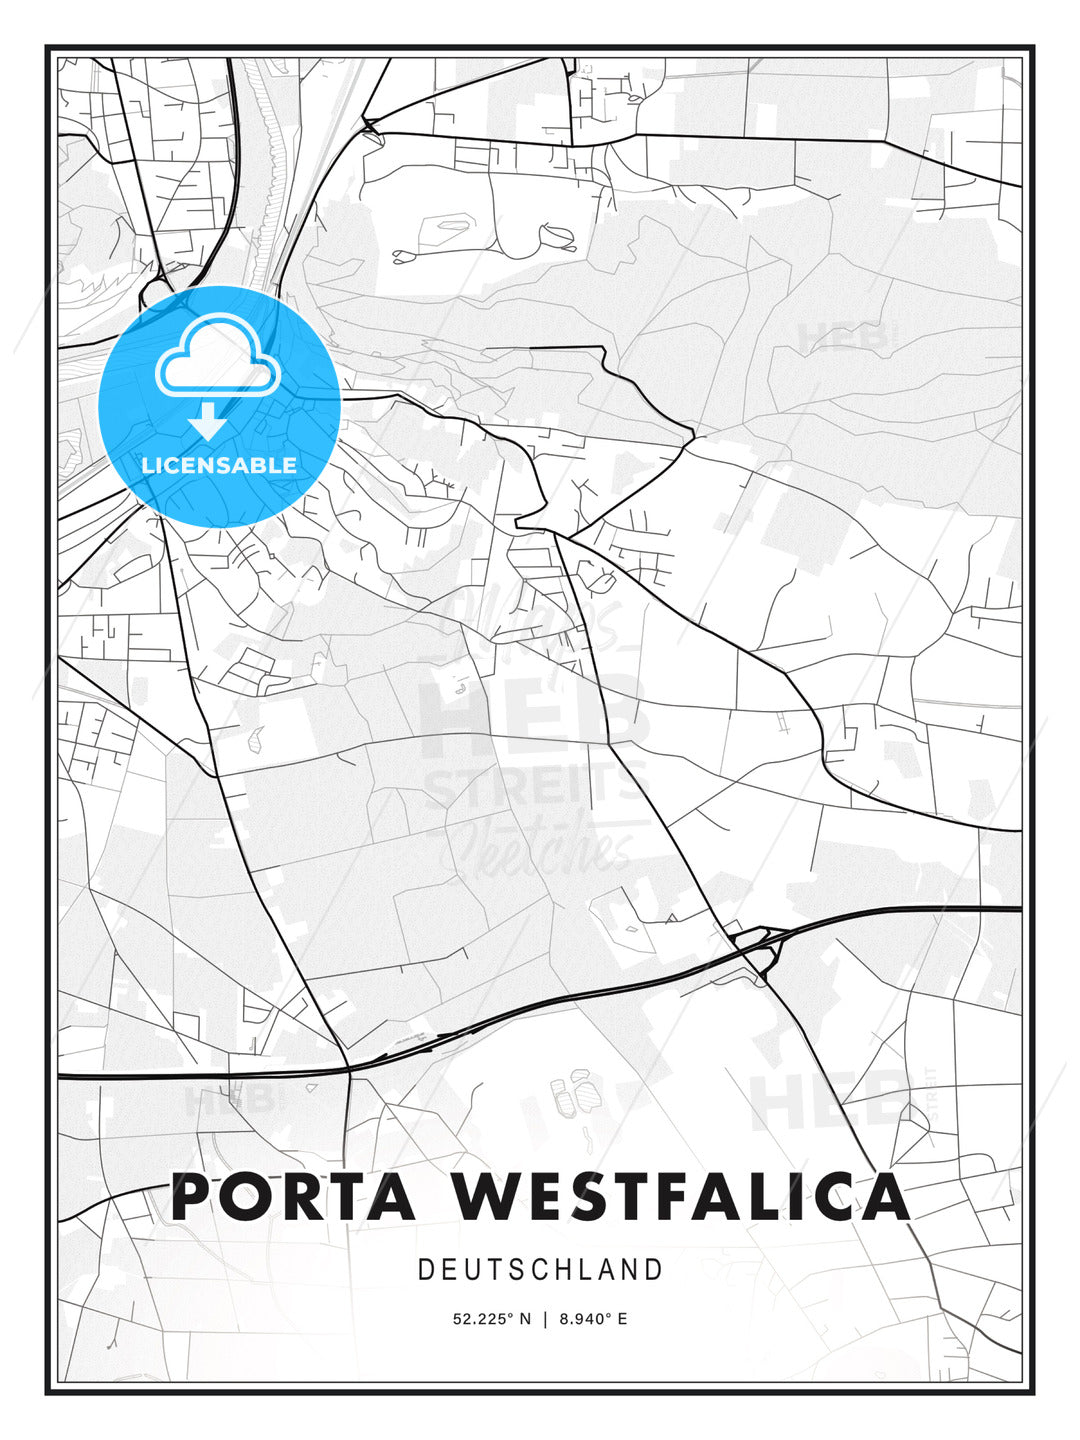 Porta Westfalica, Germany, Modern Print Template in Various Formats - HEBSTREITS Sketches